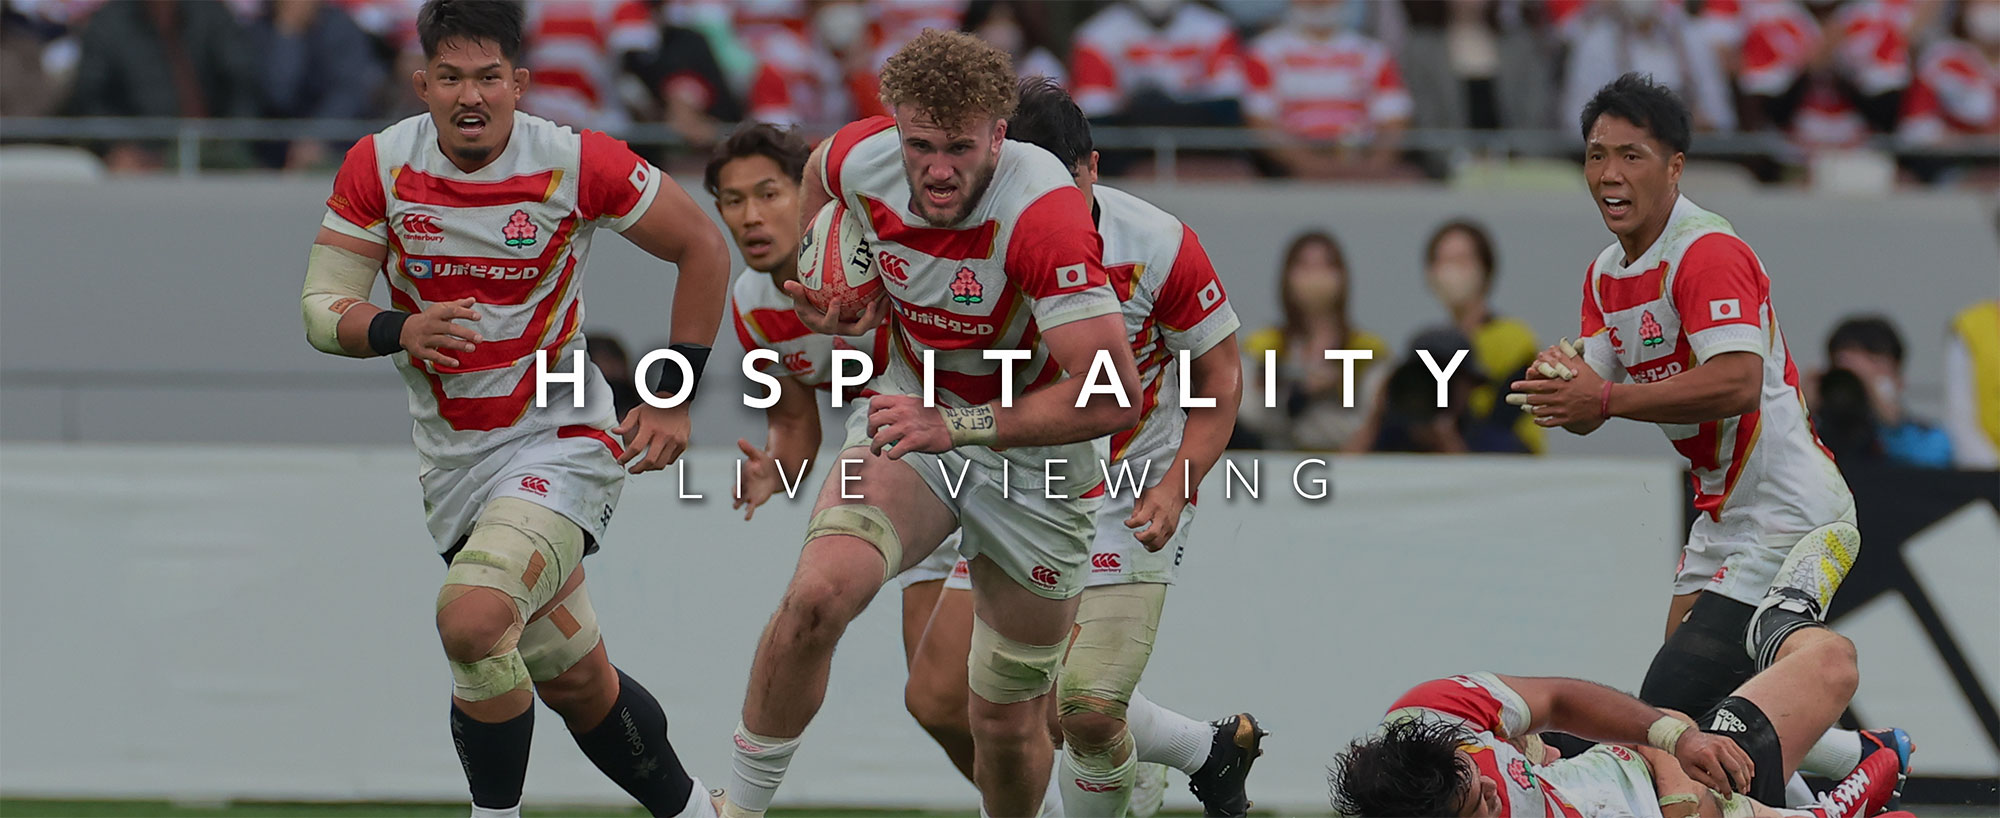 HOSPITALITY LIVE VIEWING